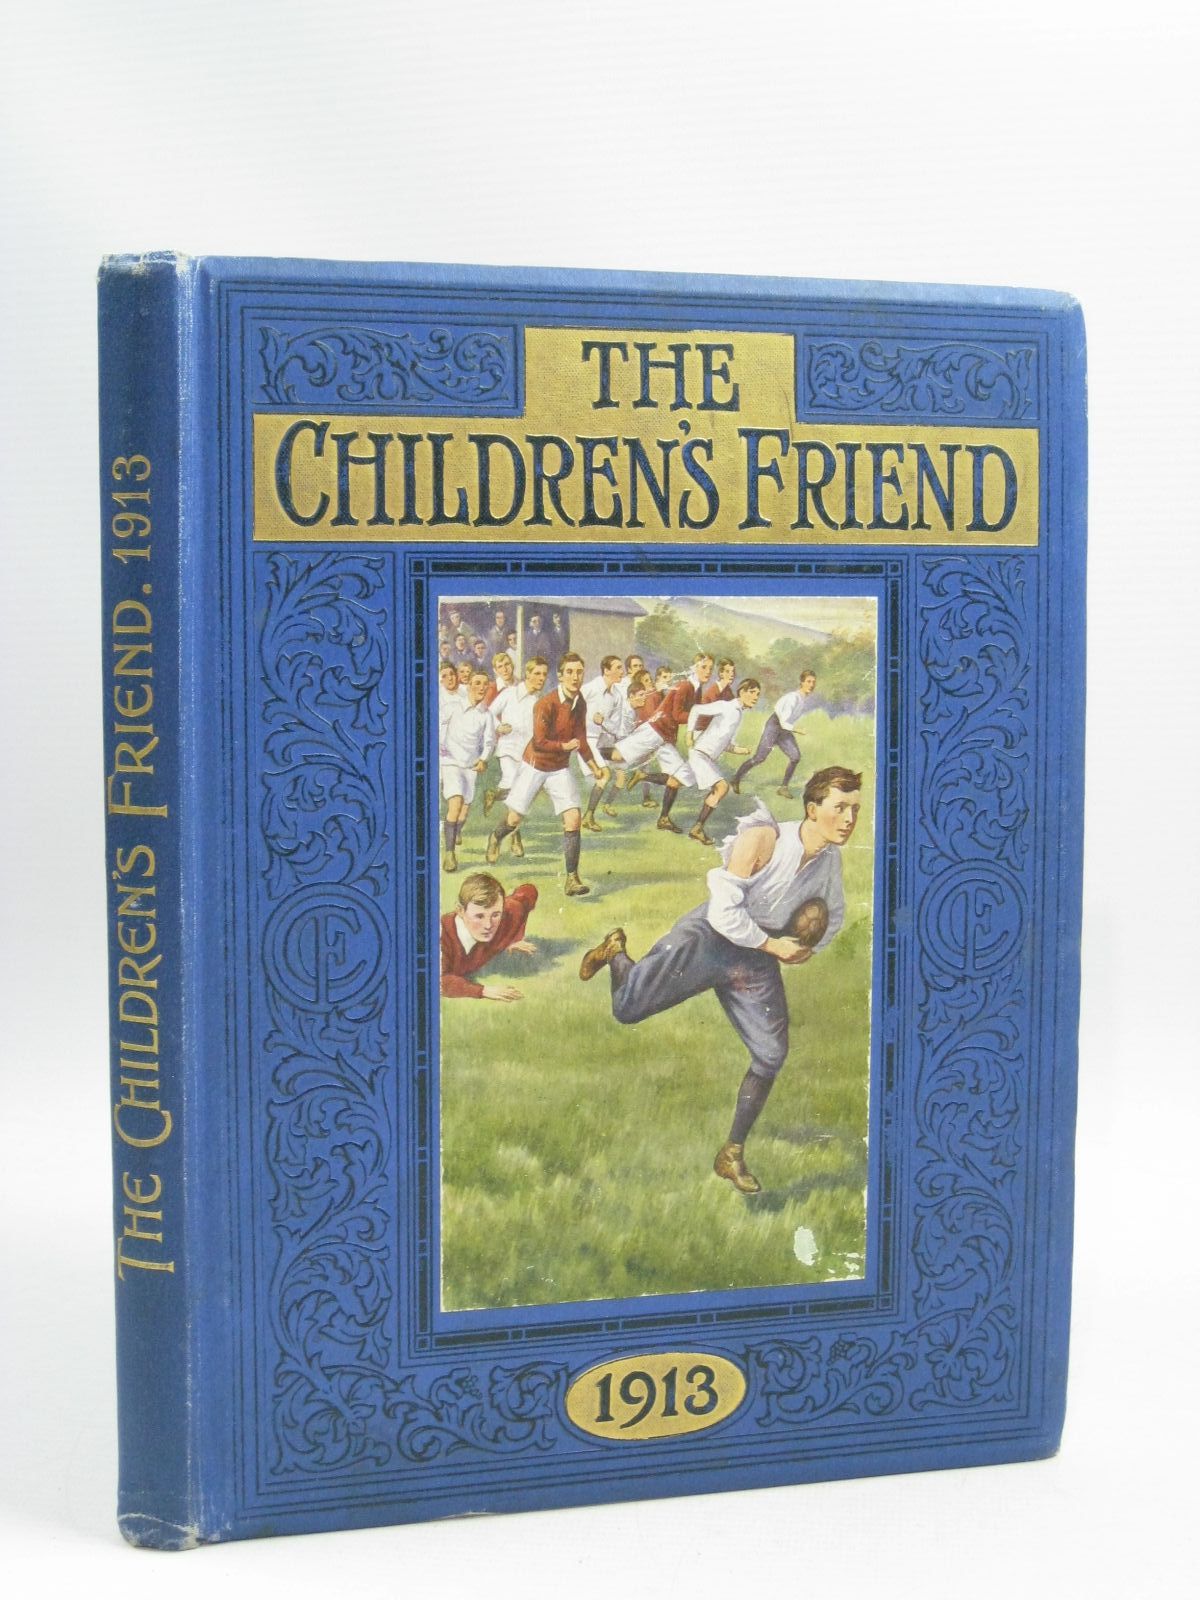 Photo of THE CHILDREN'S FRIEND AND PLAY-HOUR COMPANION 1913 written by Aitken, W. Francis published by S.W. Partridge & Co. Ltd. (STOCK CODE: 1315264)  for sale by Stella & Rose's Books